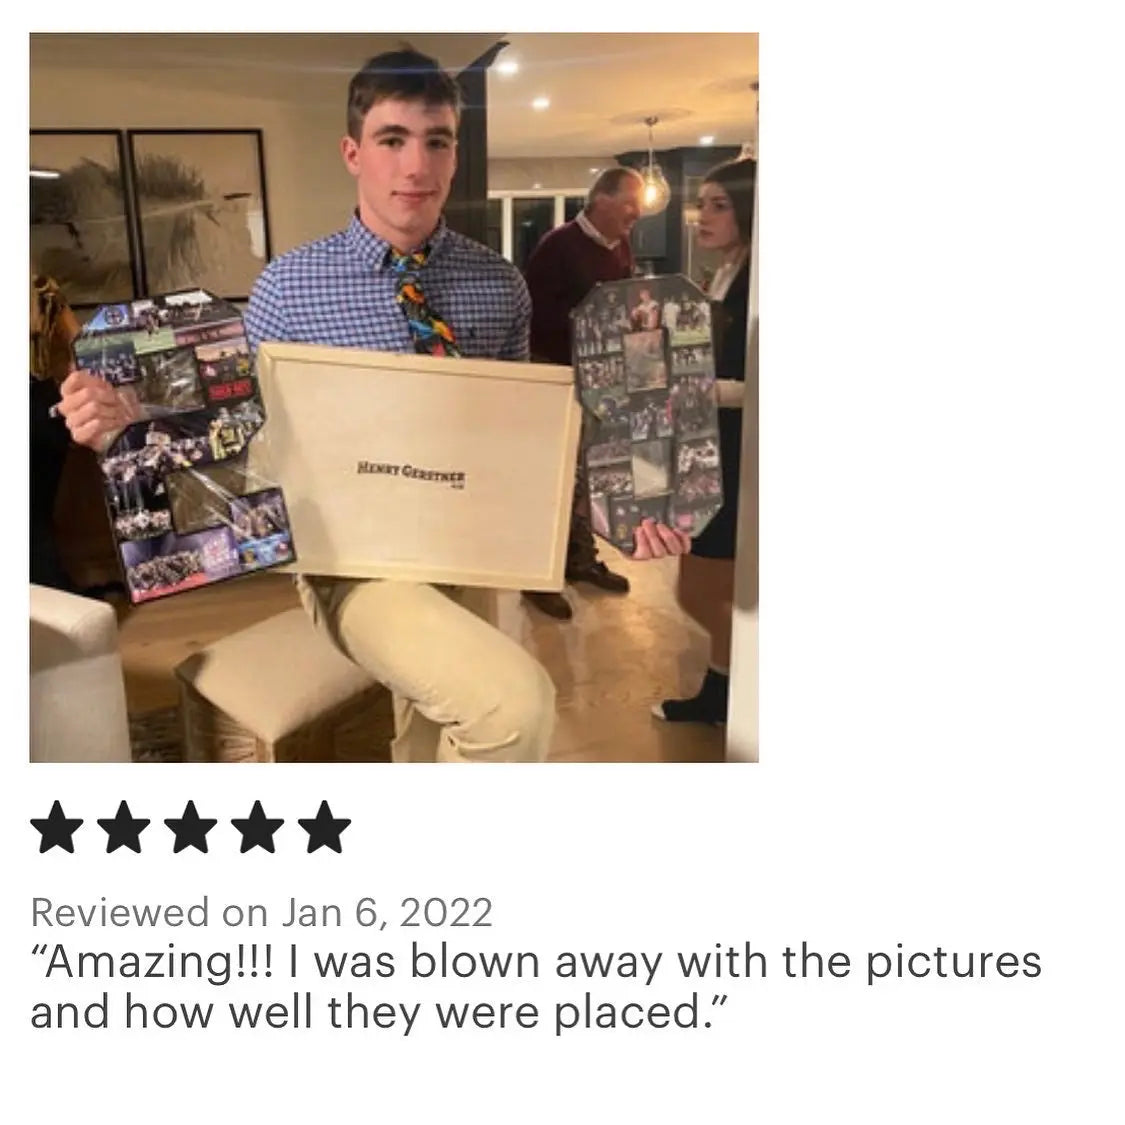 Review for football gift, 15 inch collage. Five star review for amazing product!